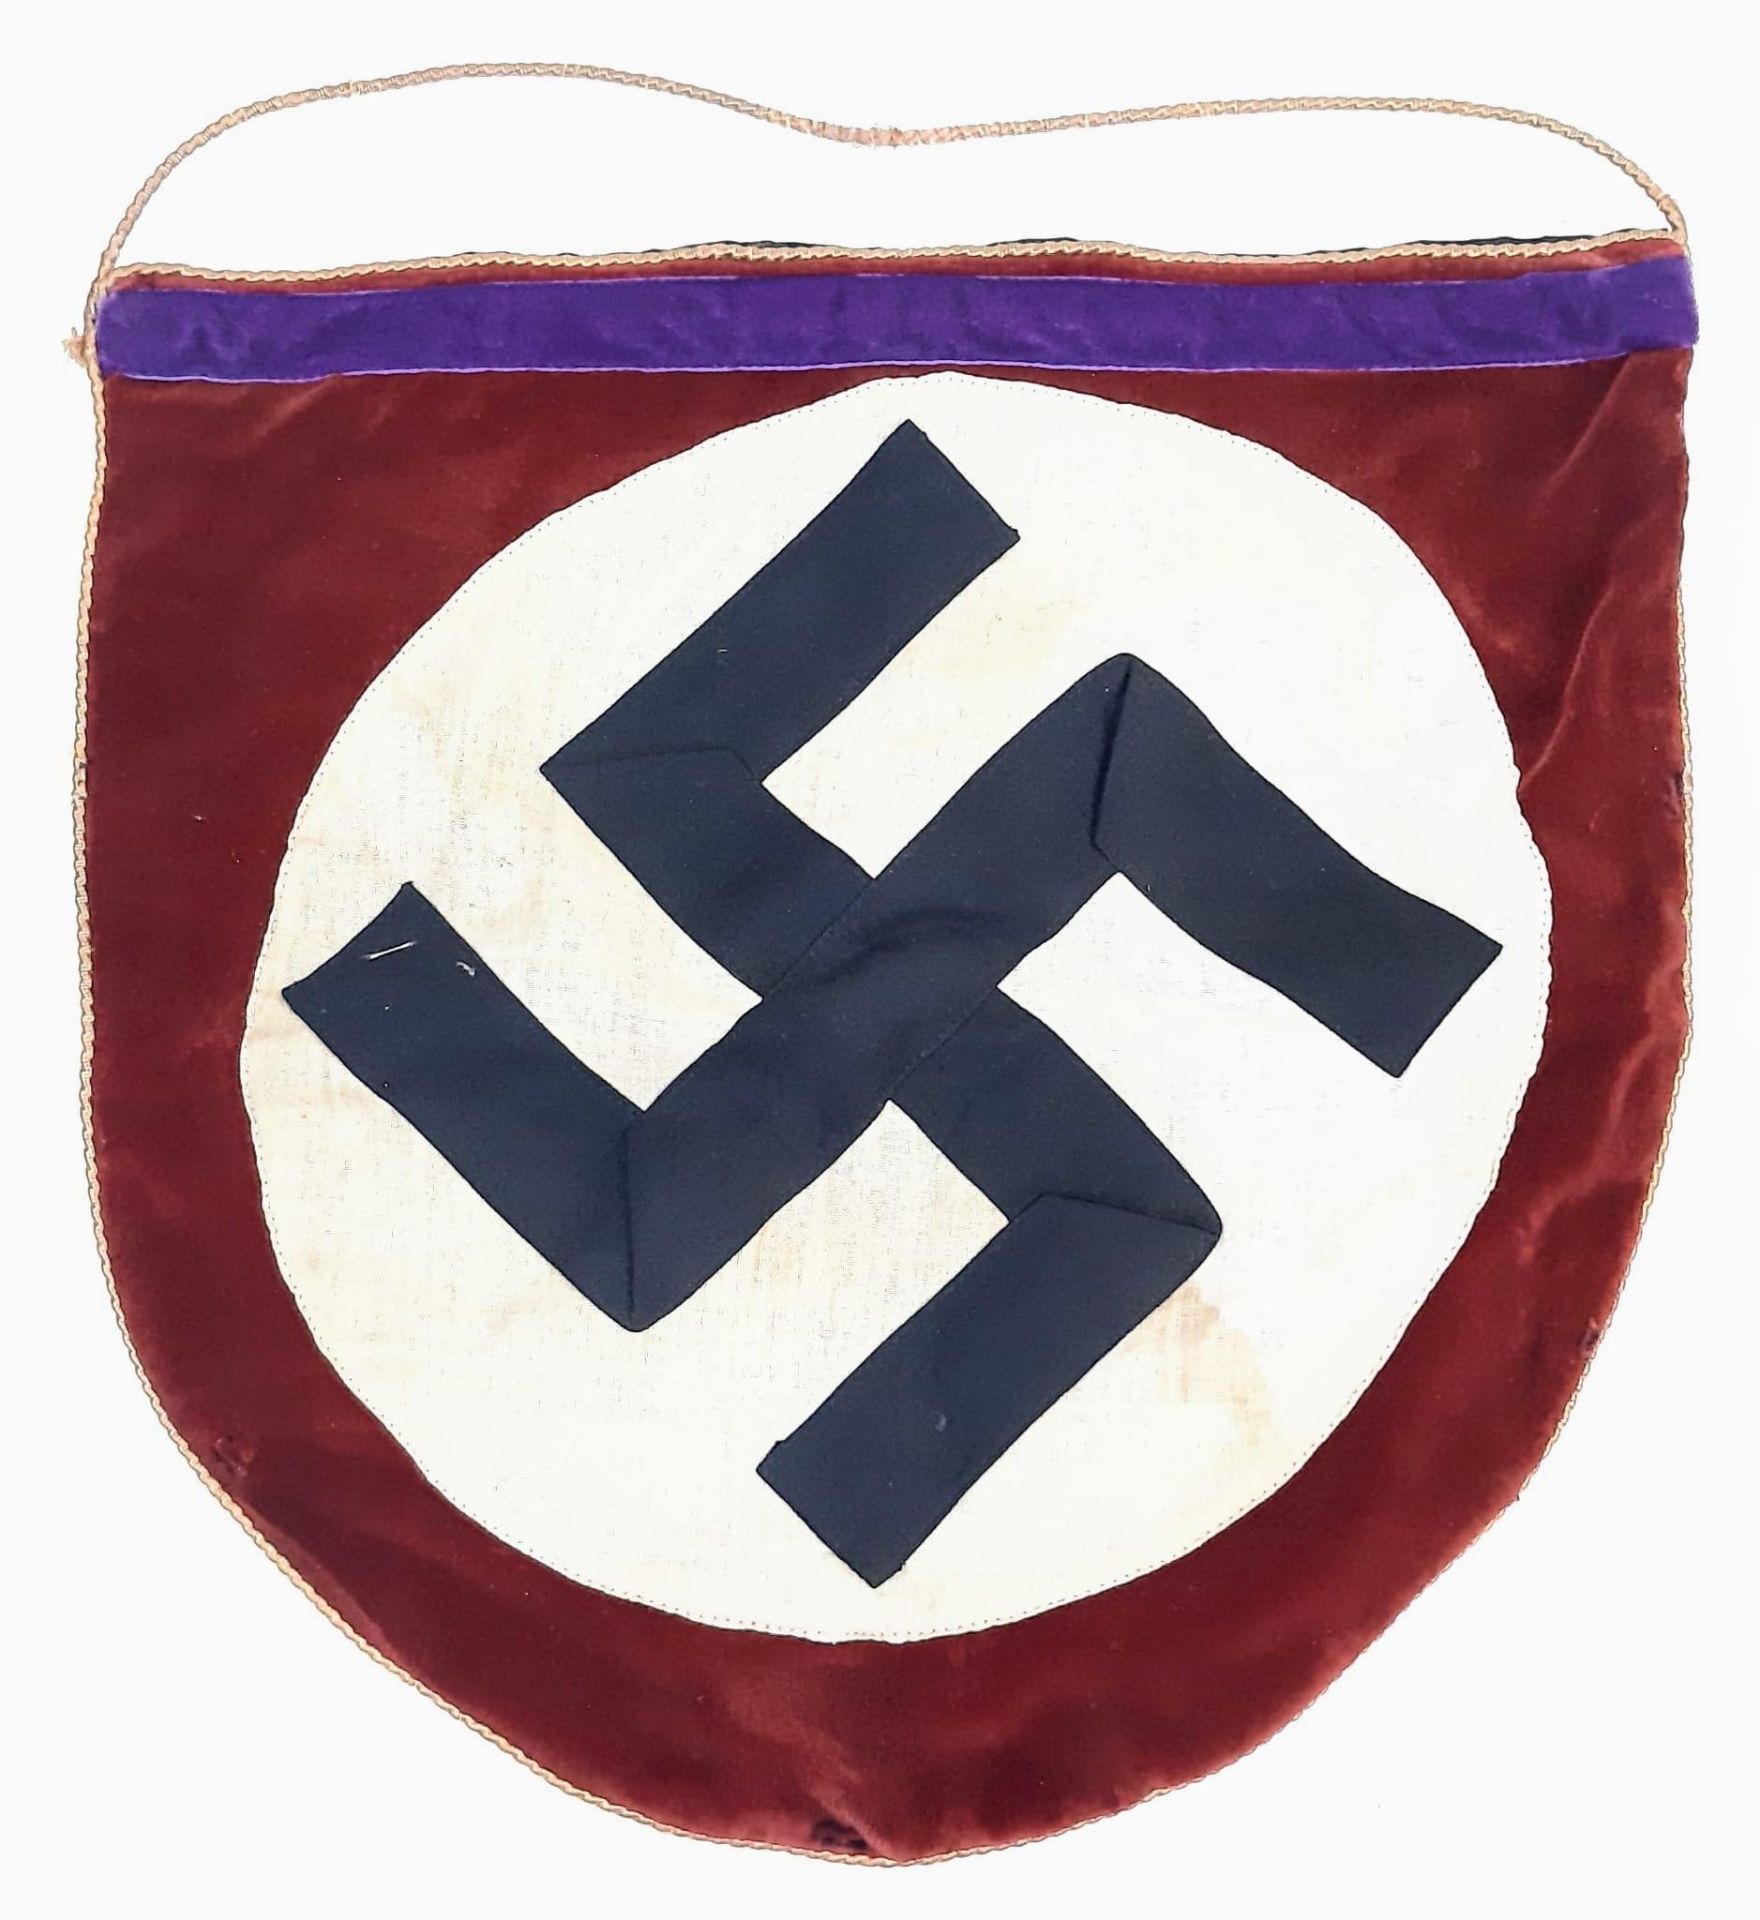 Rare 3rd Reich Pulpit Banner. Hard to find interesting item.